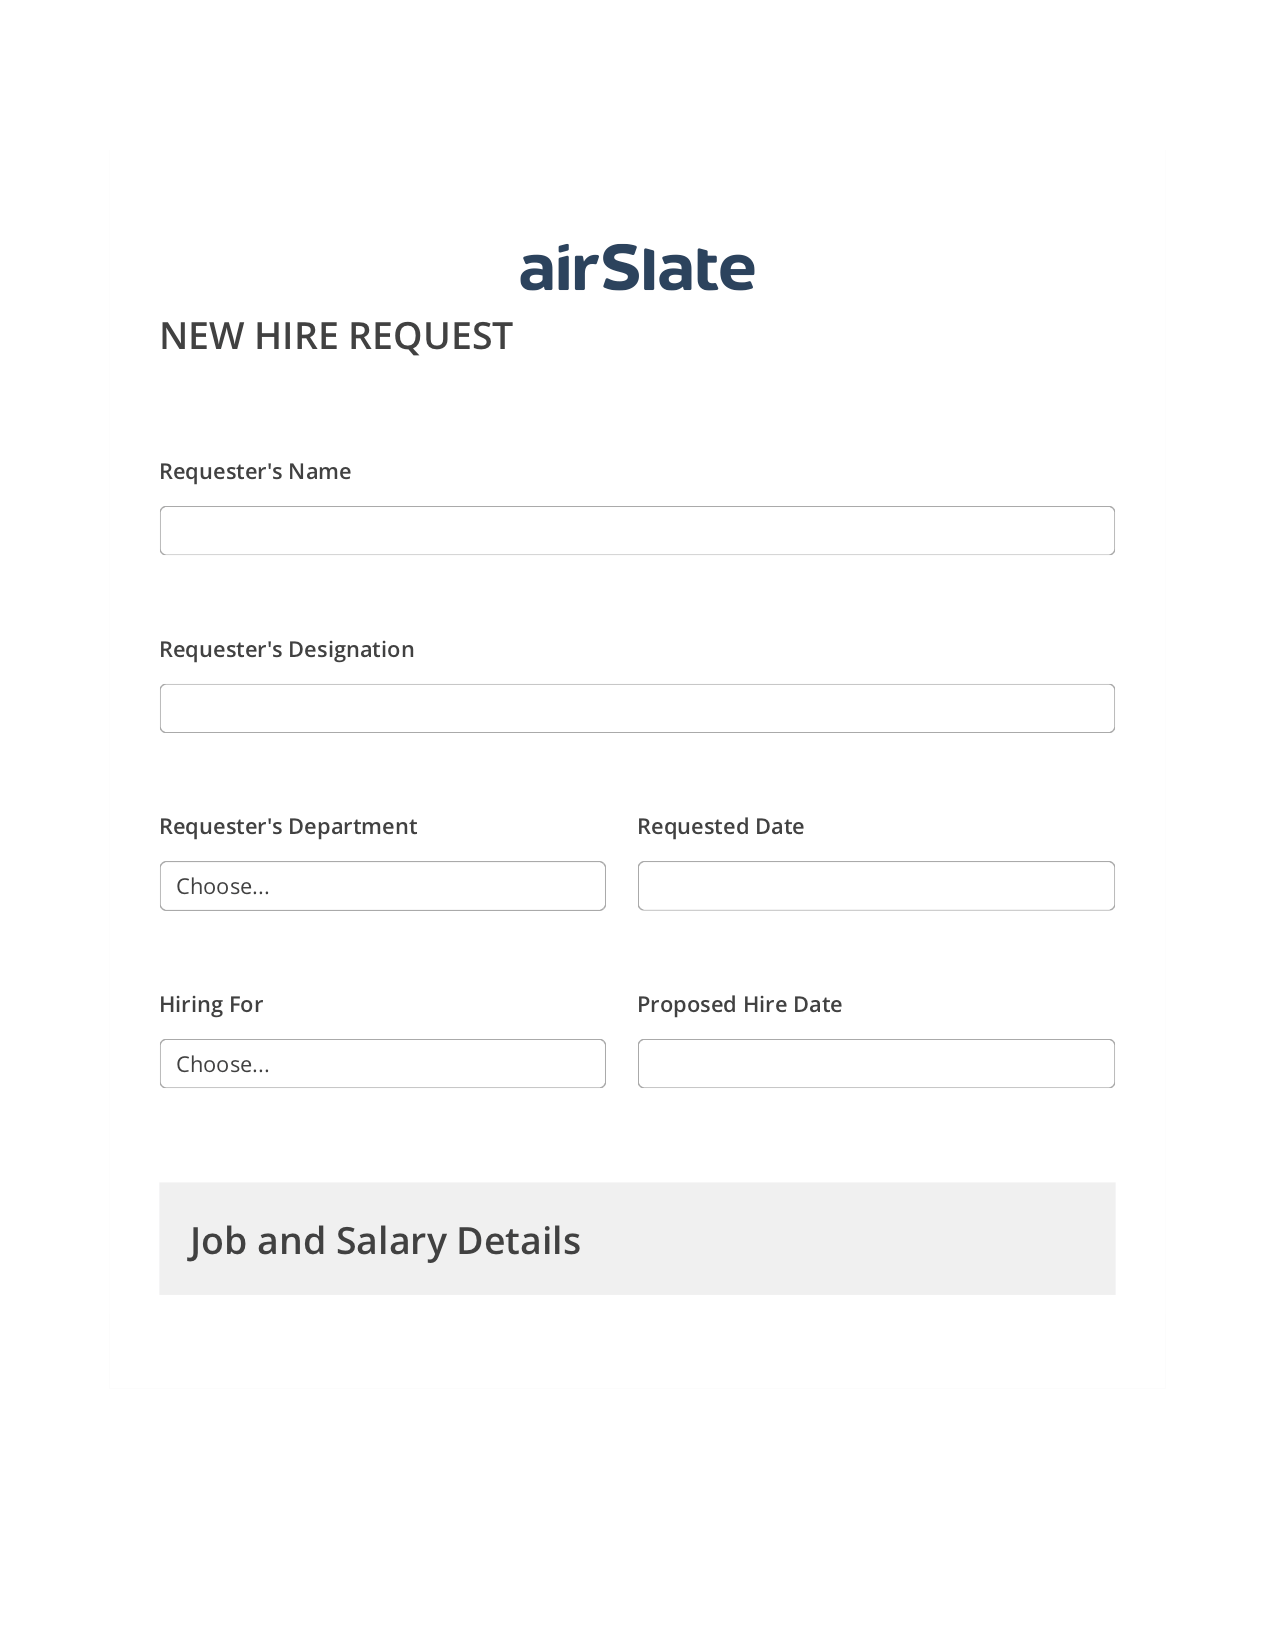 Multirole Hiring Request Workflow Pre-fill Dropdowns from CSV file Bot, Send a Slate with Roles Bot, Export to WebMerge Bot